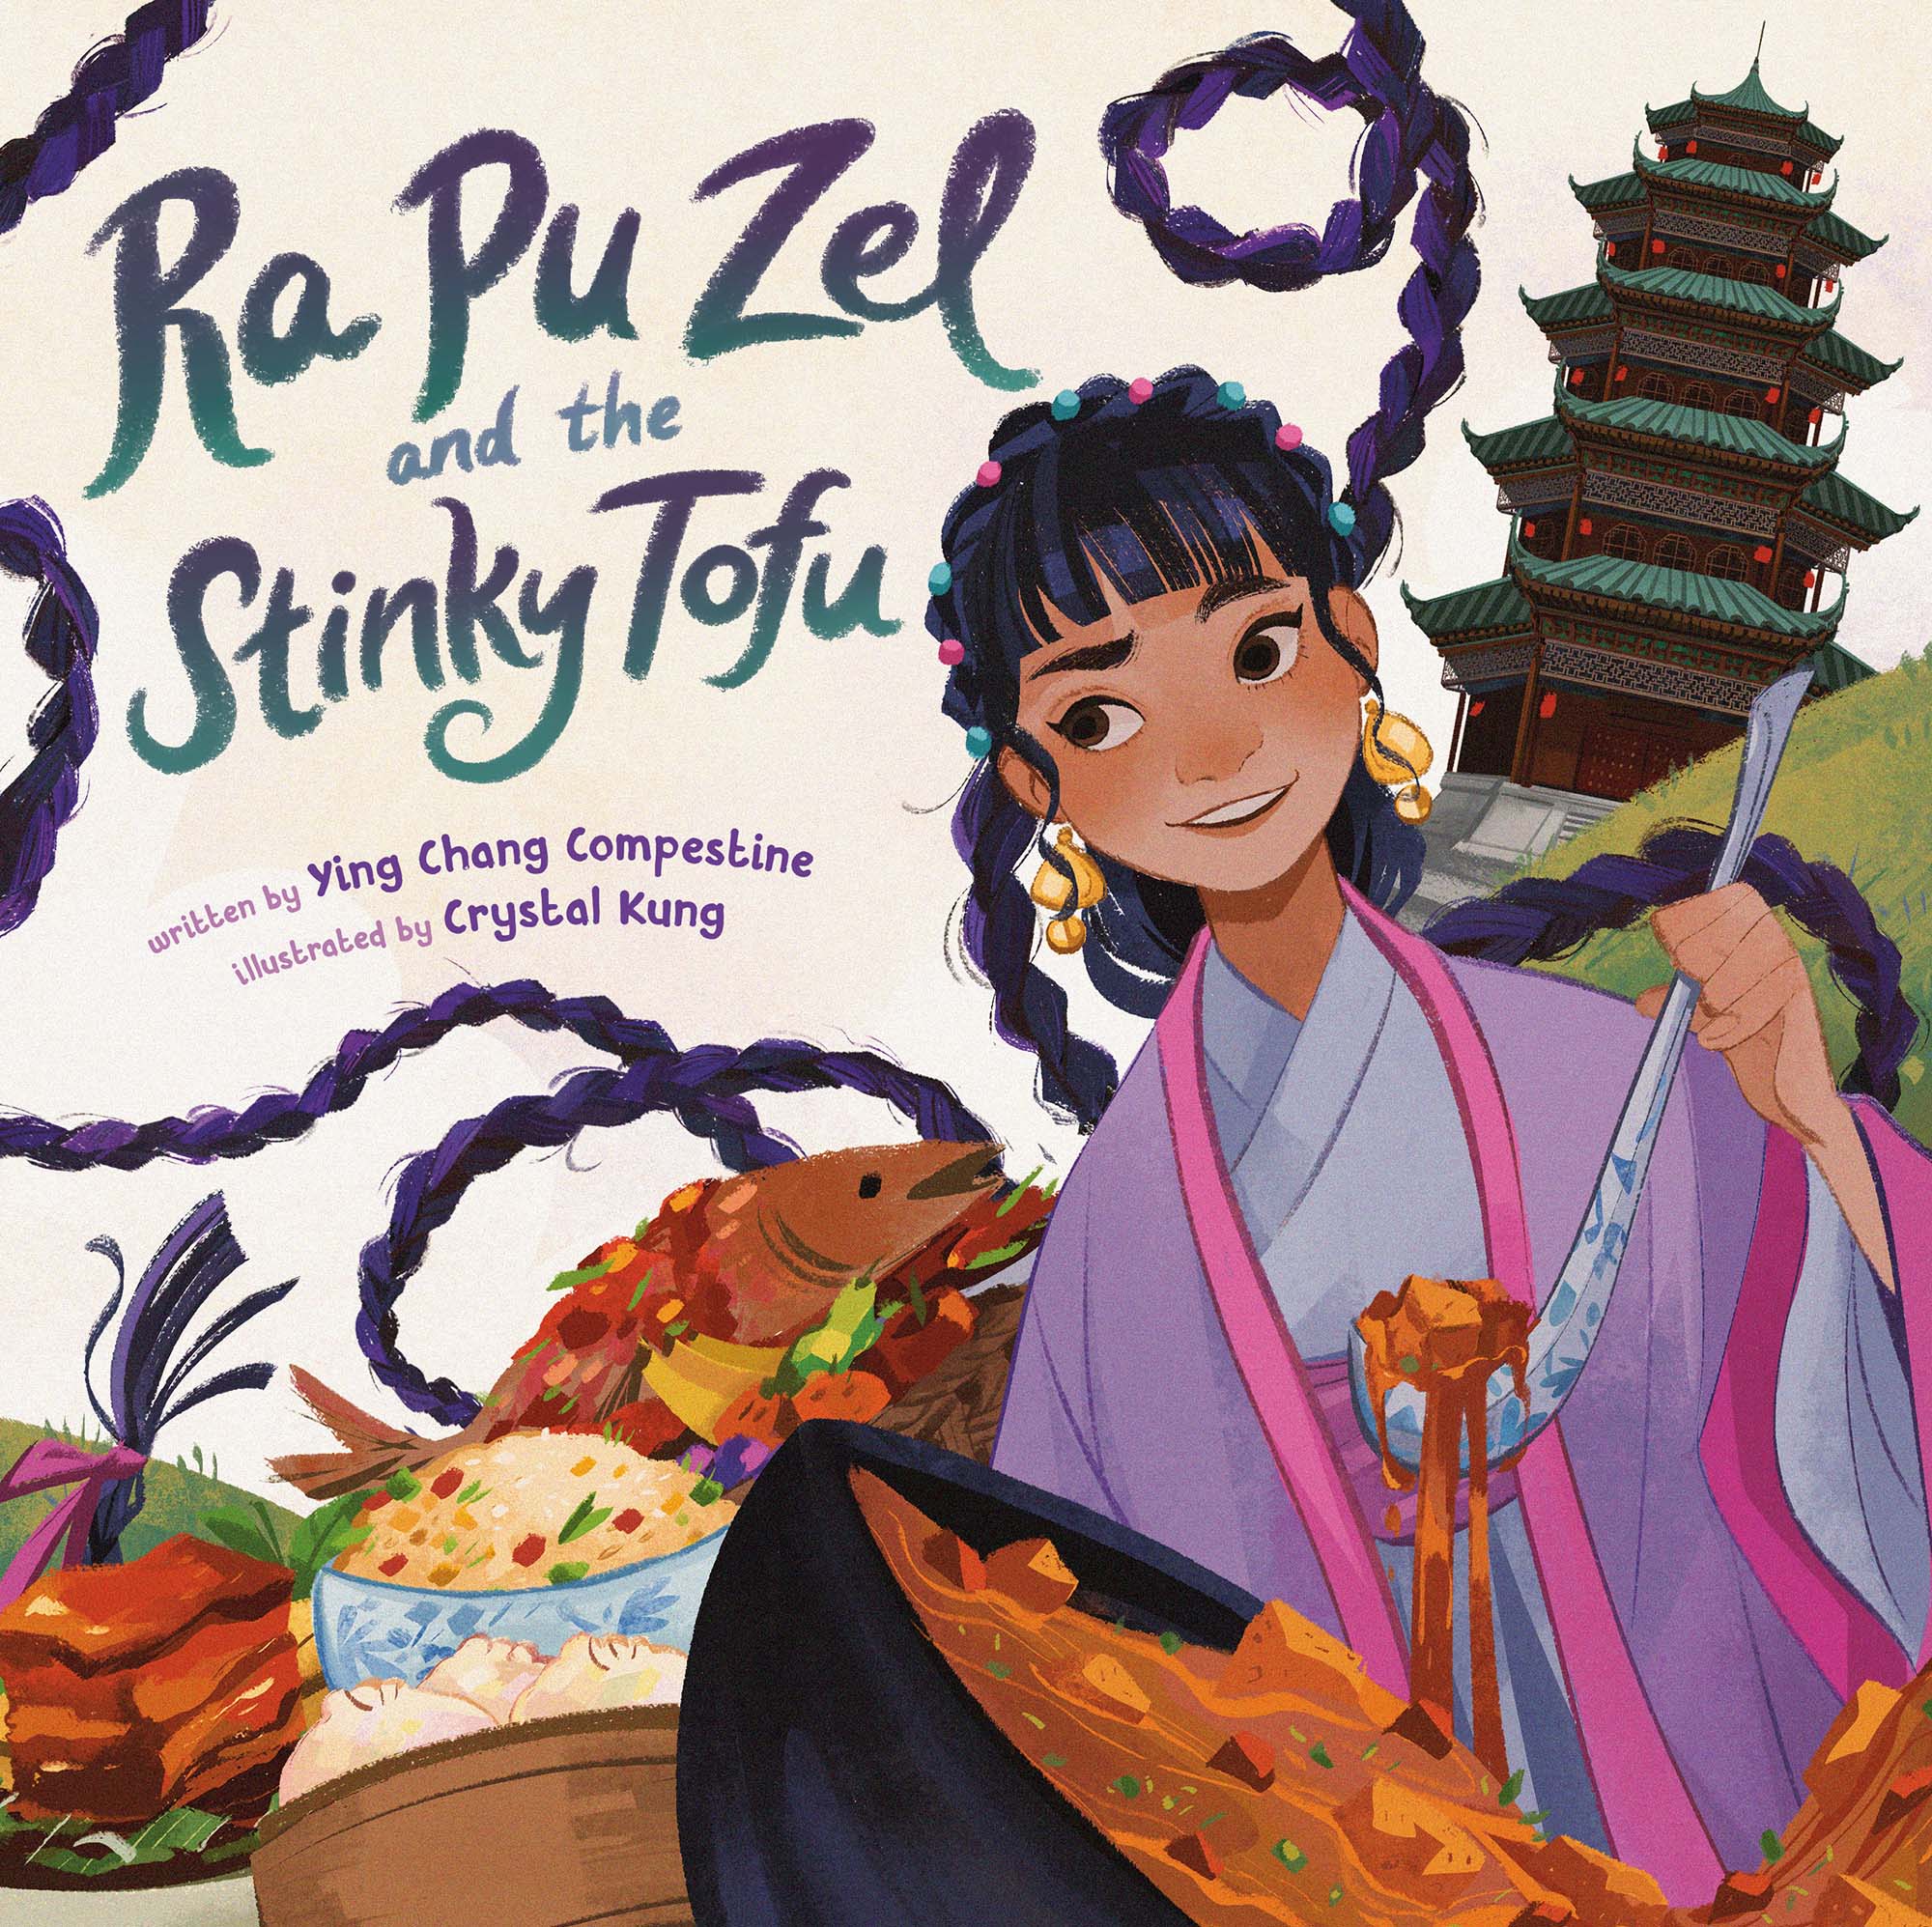 Cover of the children's book 'Ra Pu Zel and the Stinky Tofu' shows a princess with a long, black braid surrounded by many bowls of Chinese food.